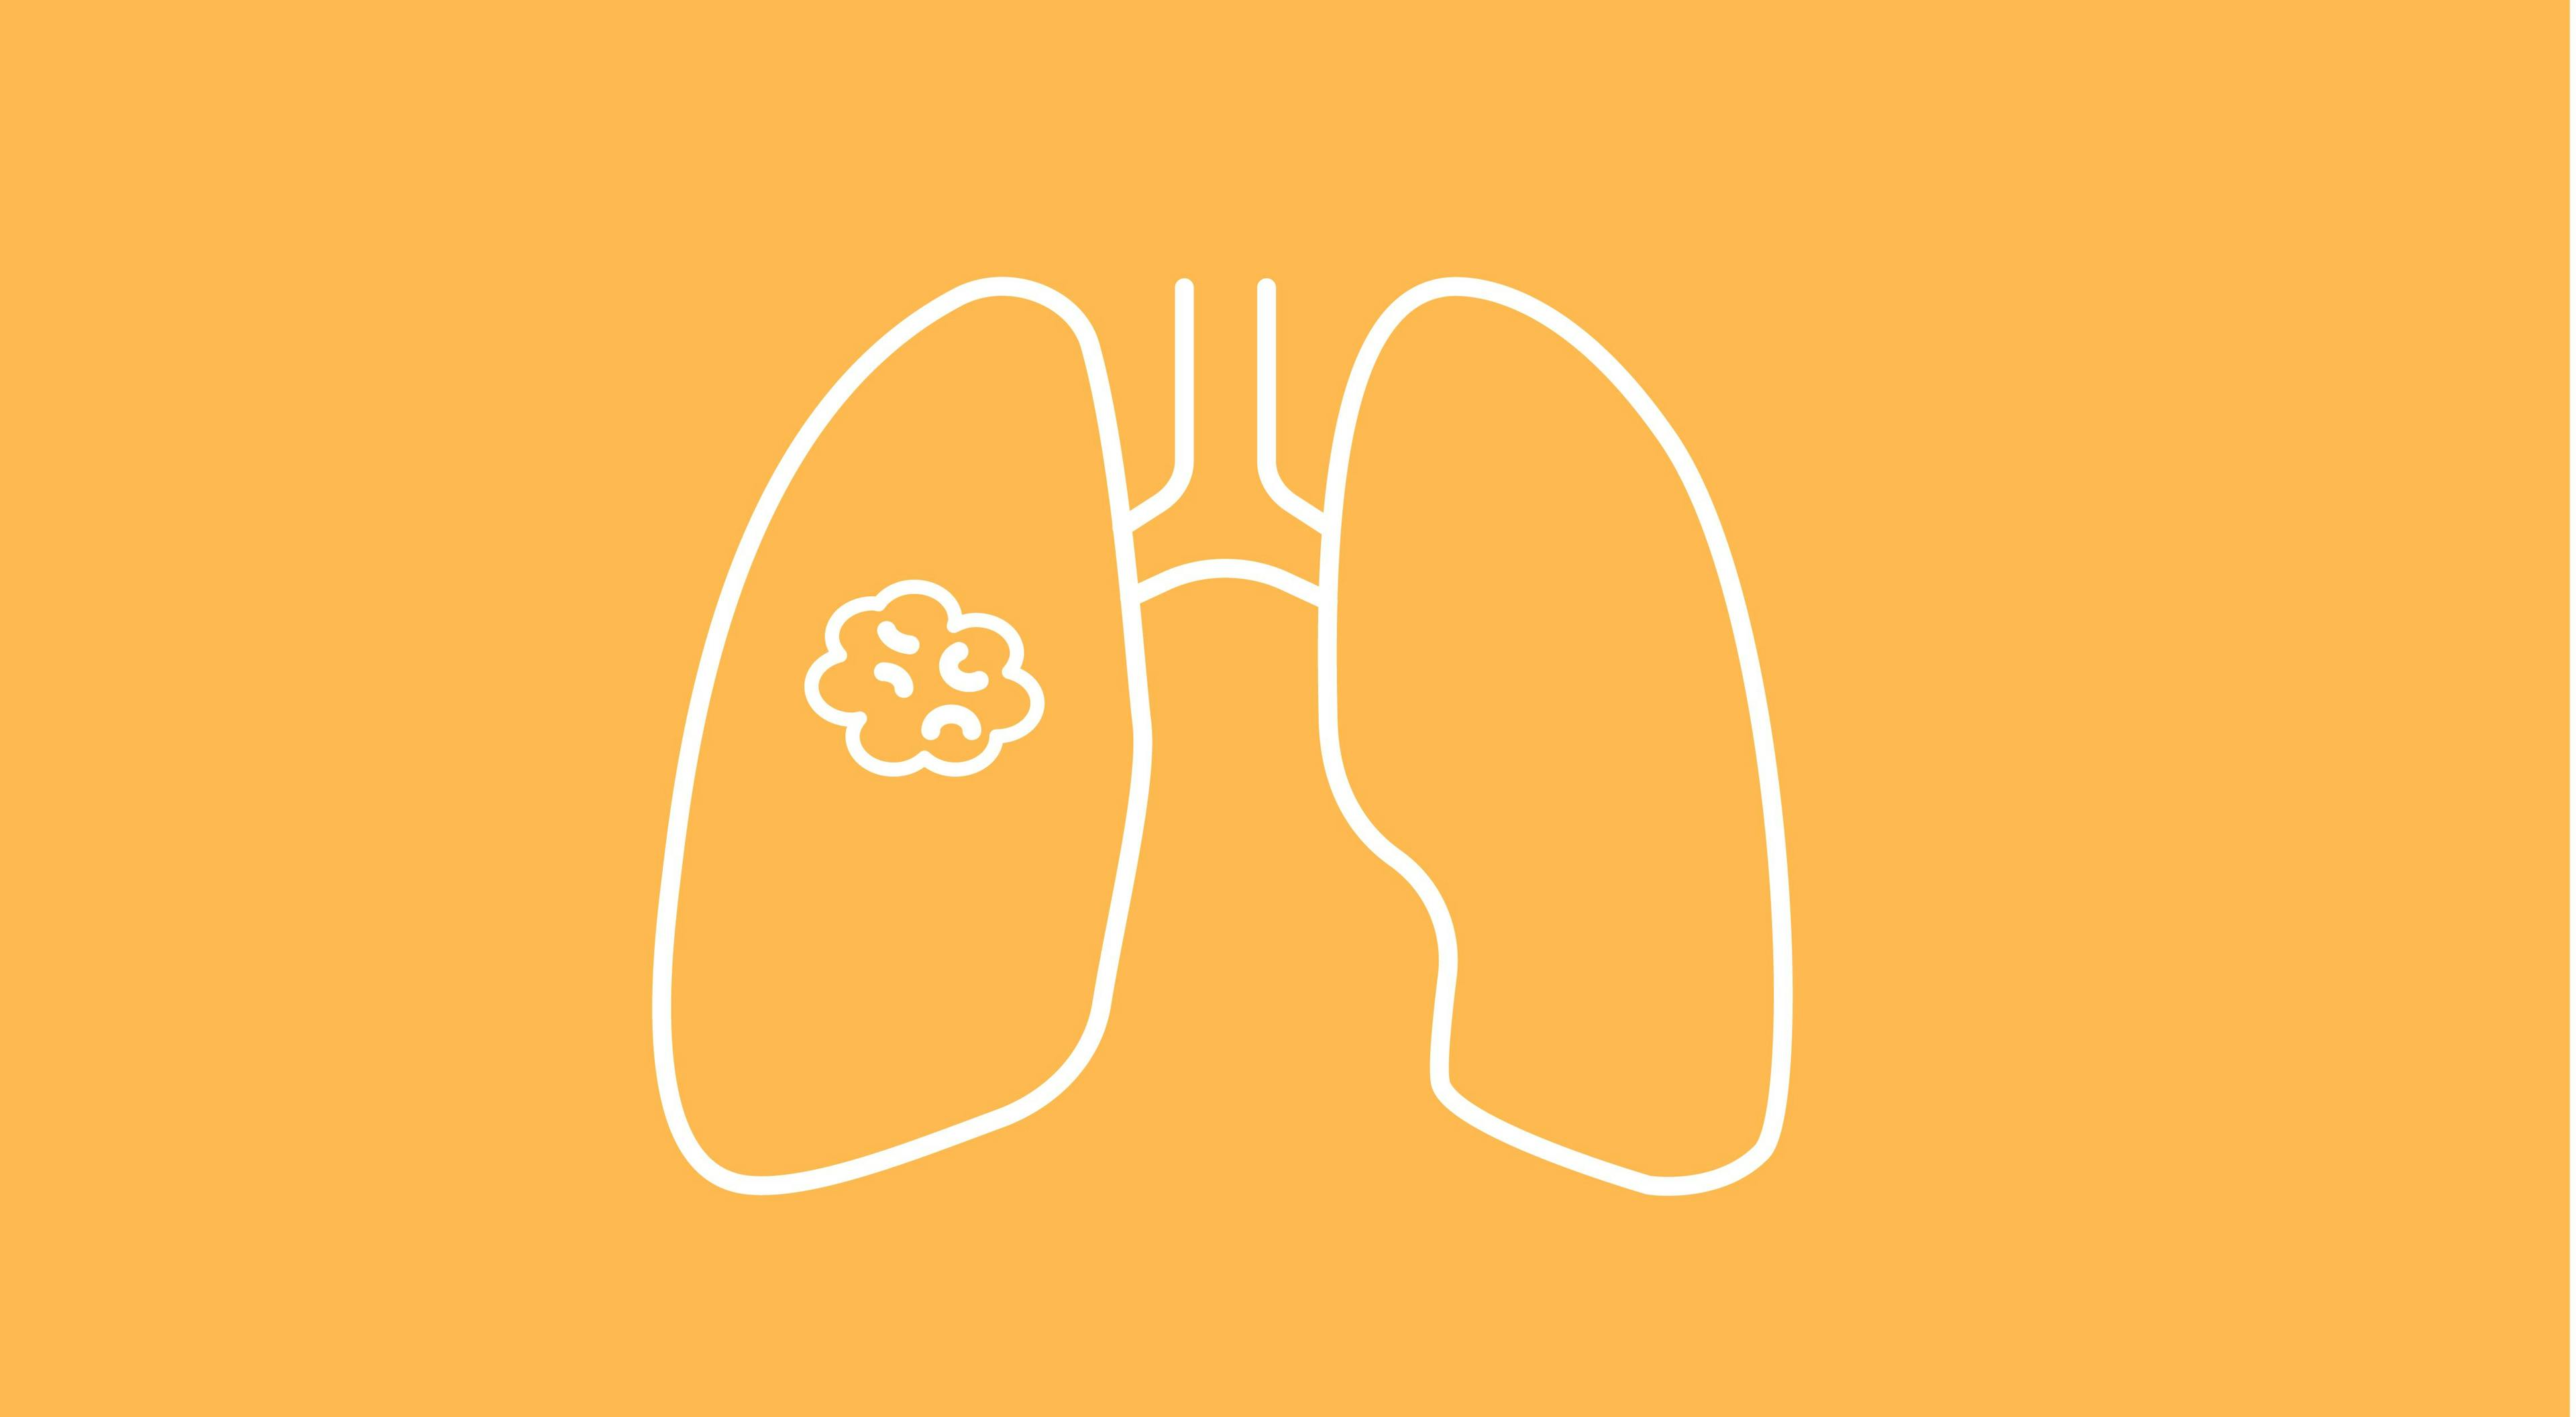 More Broad Molecular Tests Are Needed to Accurately Treat Non-Small Cell Lung Cancer